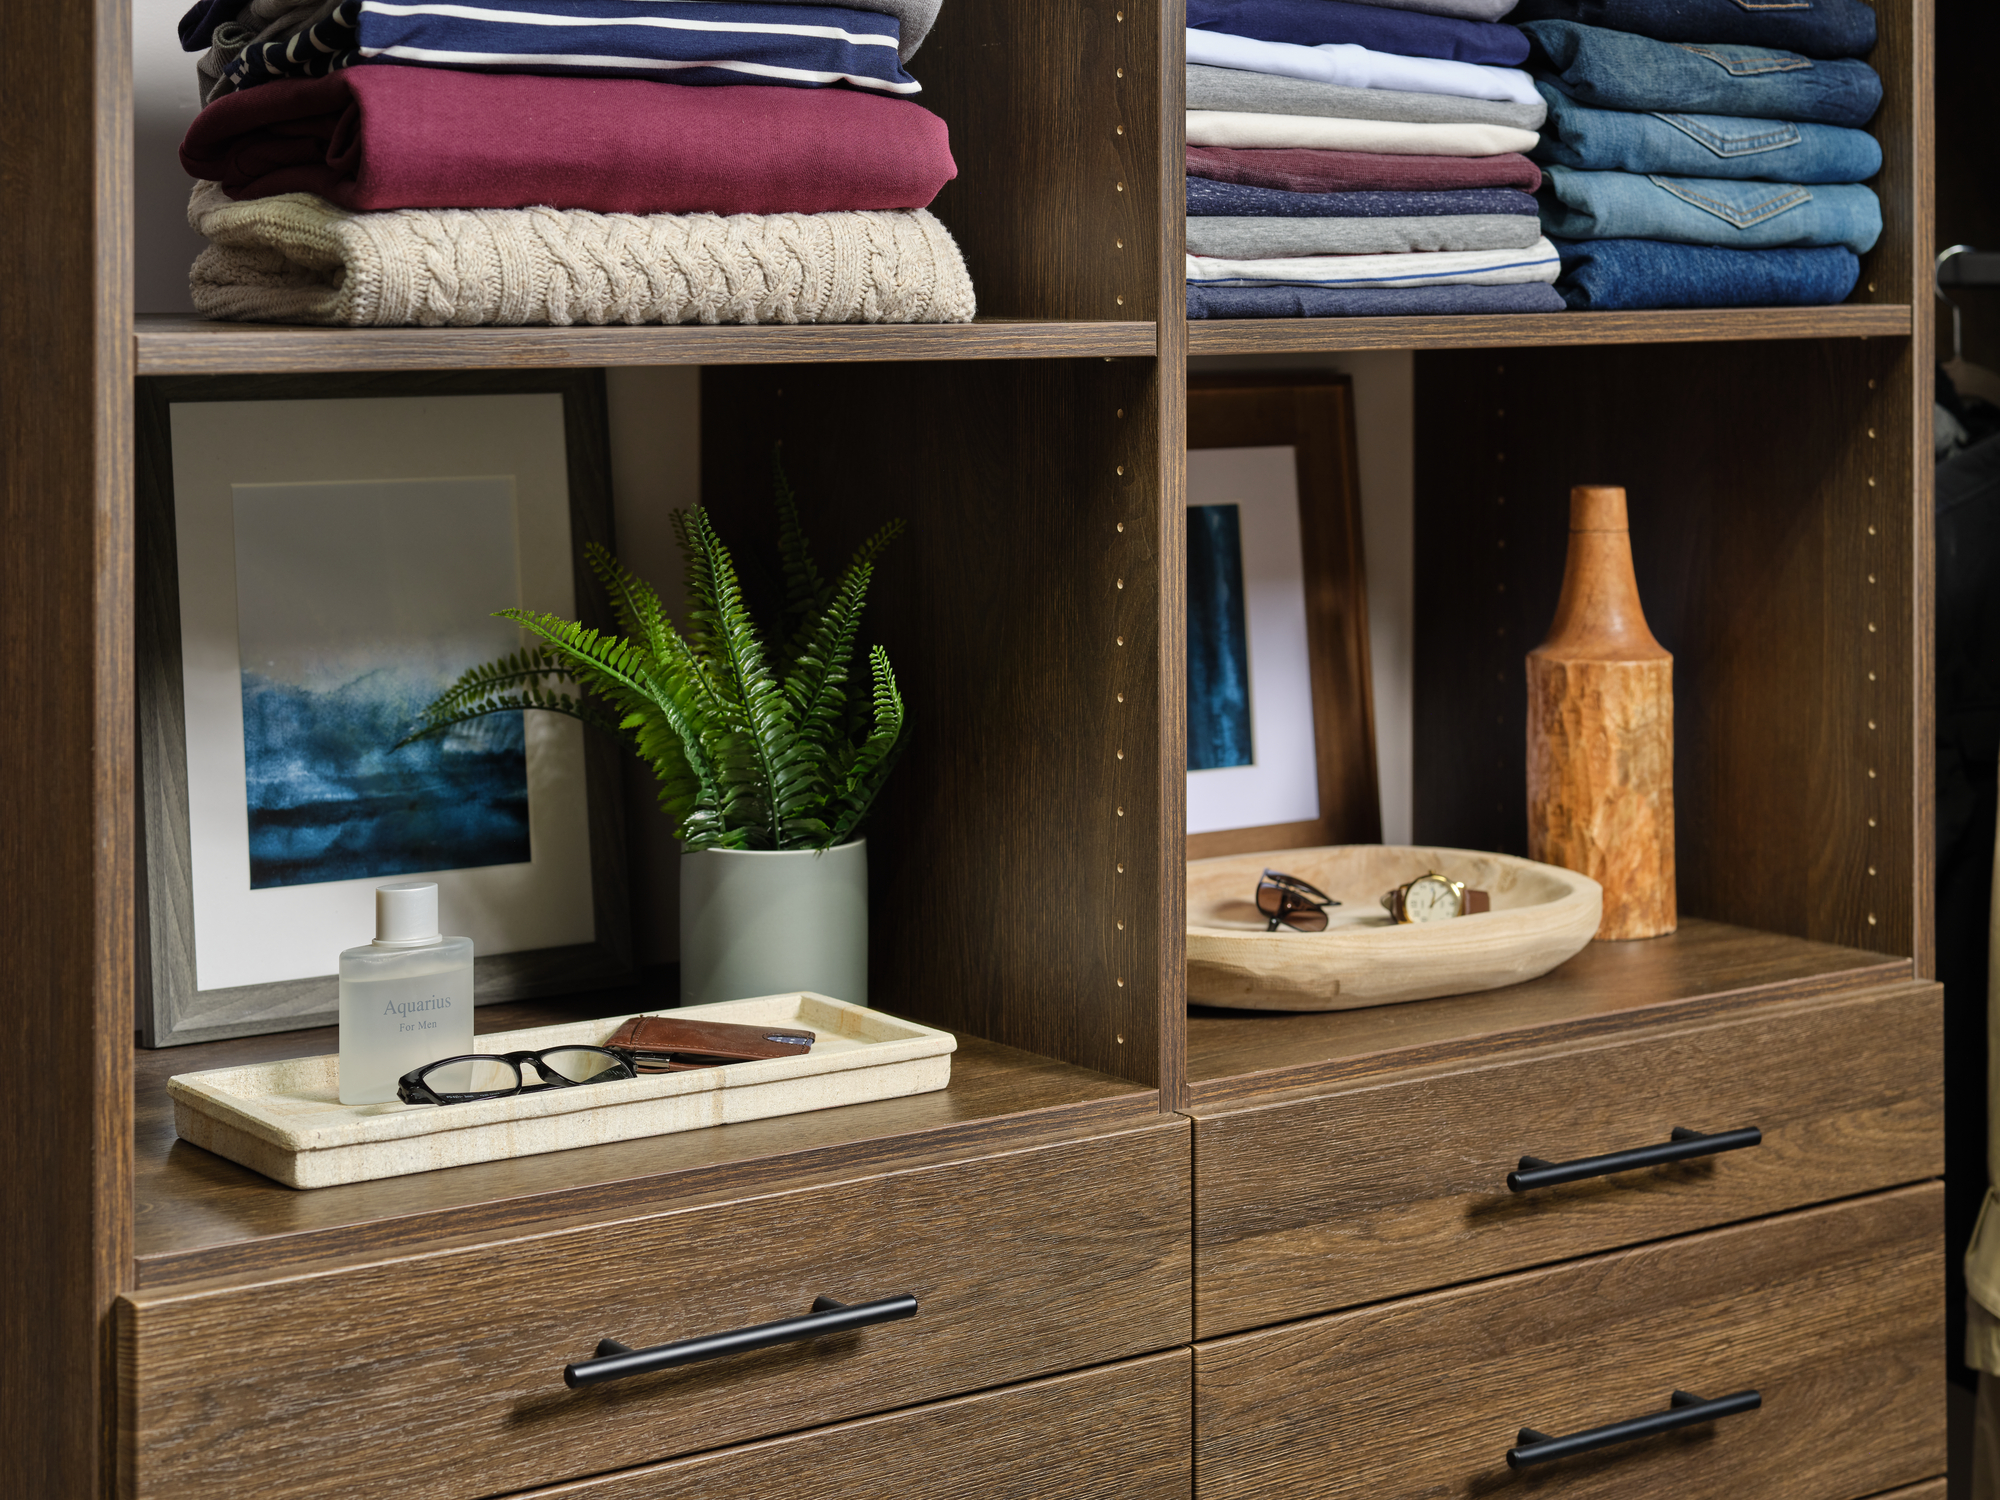 Personal item storage for a men's walk-in from Inspired Closets